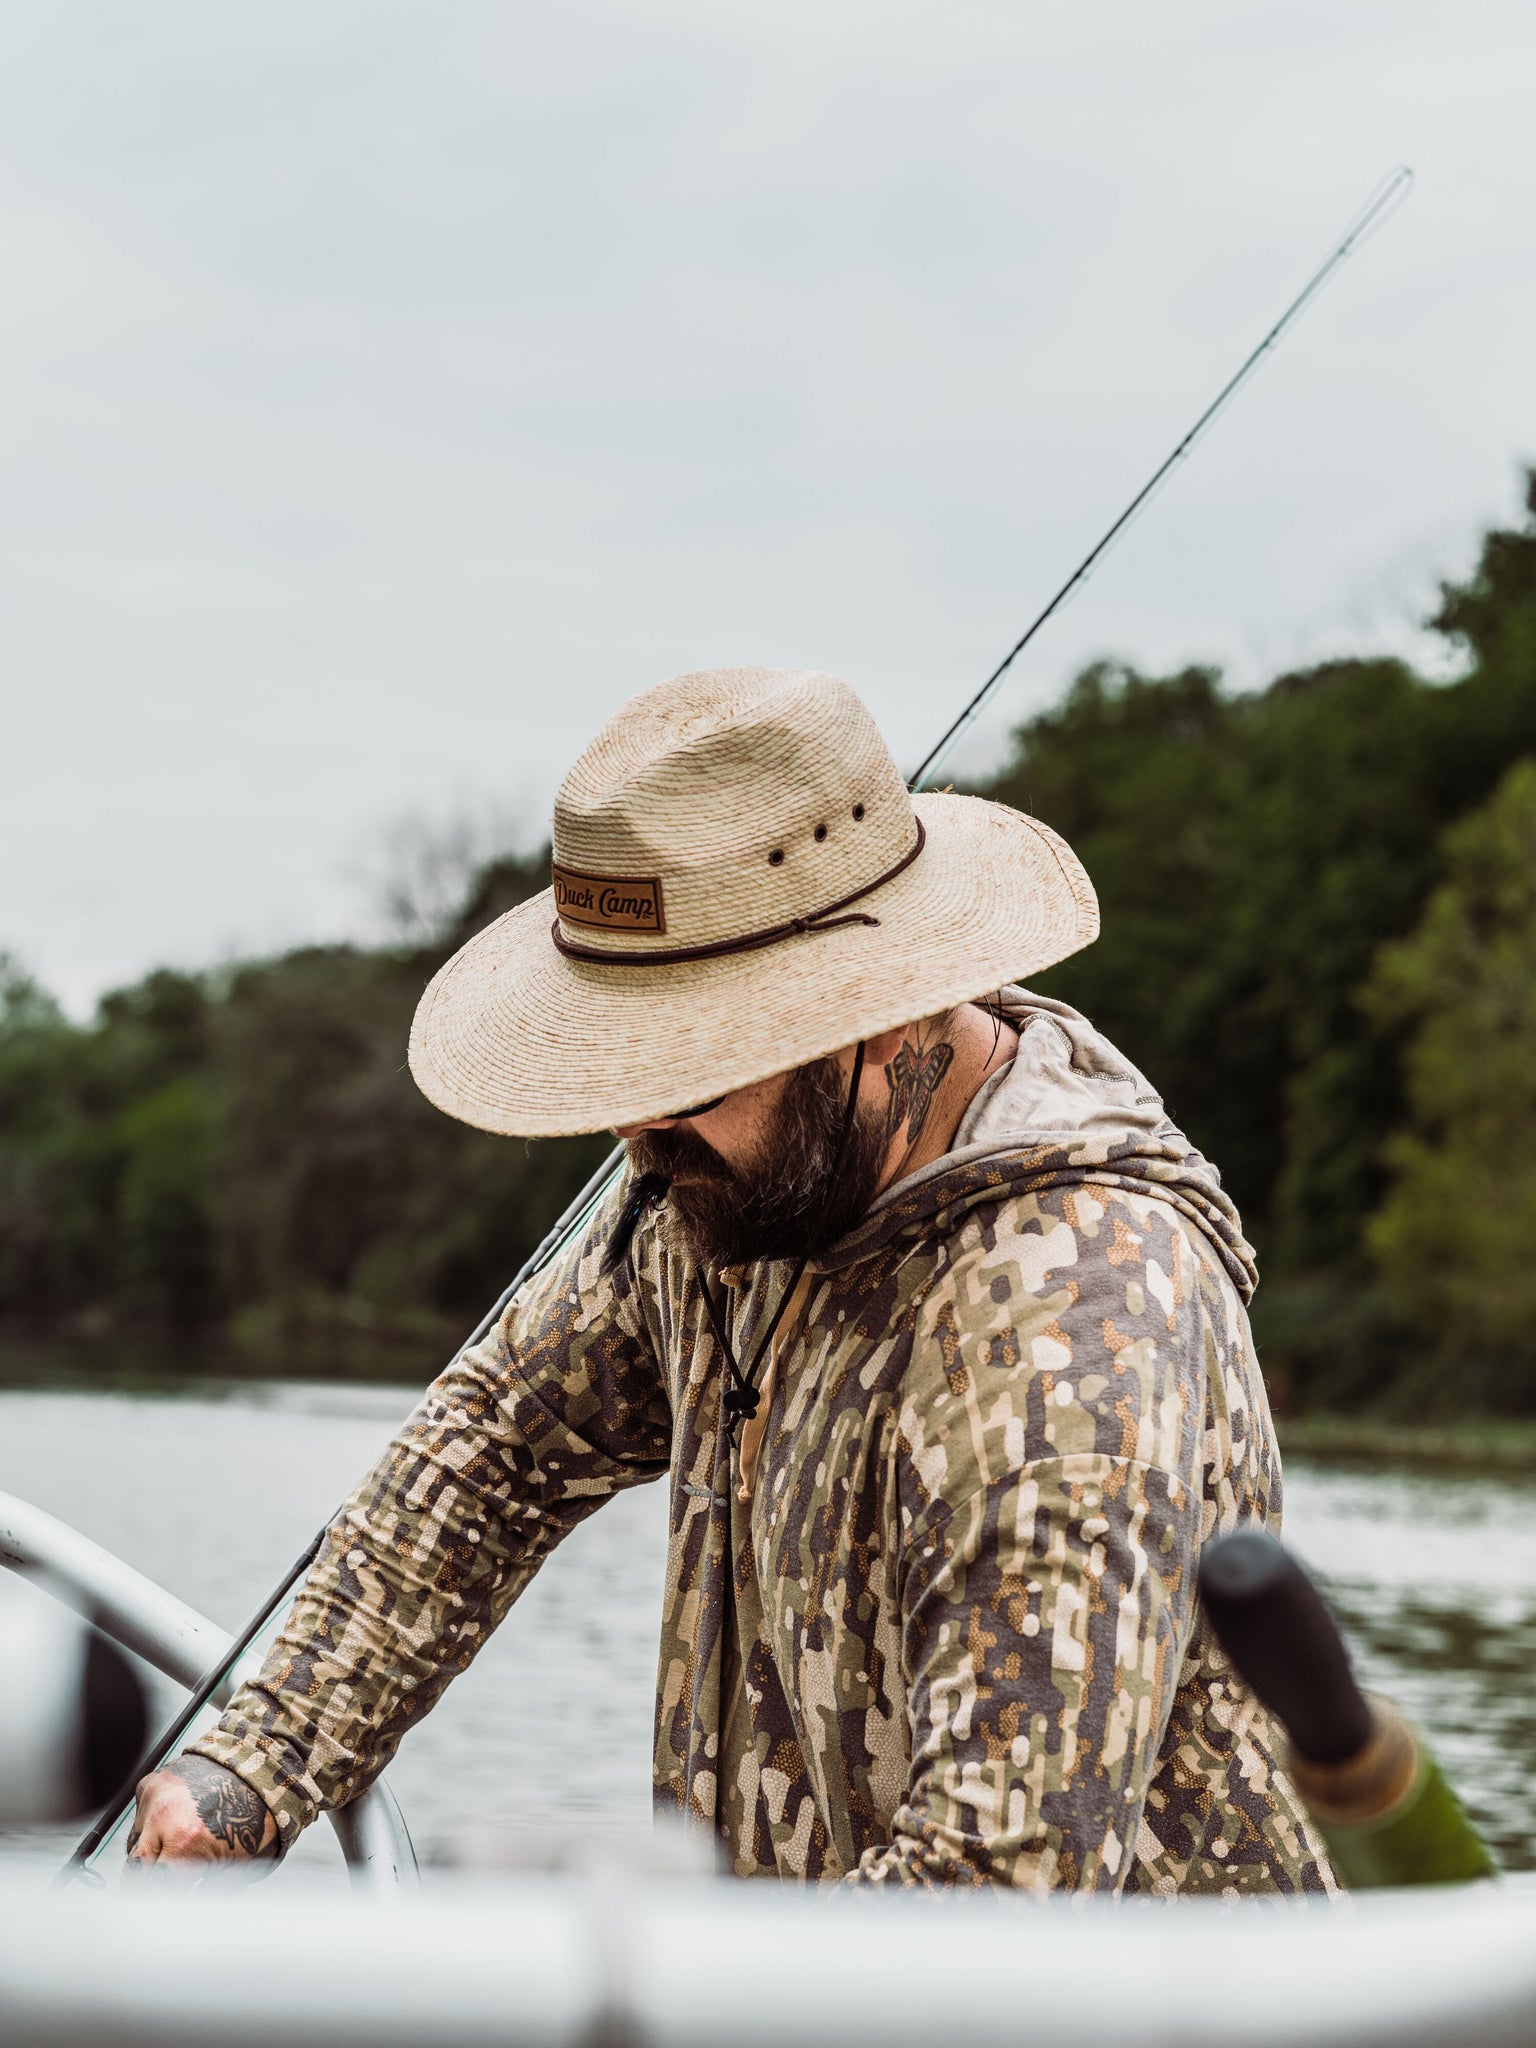 Speckled Trout Hat – Duck Camp